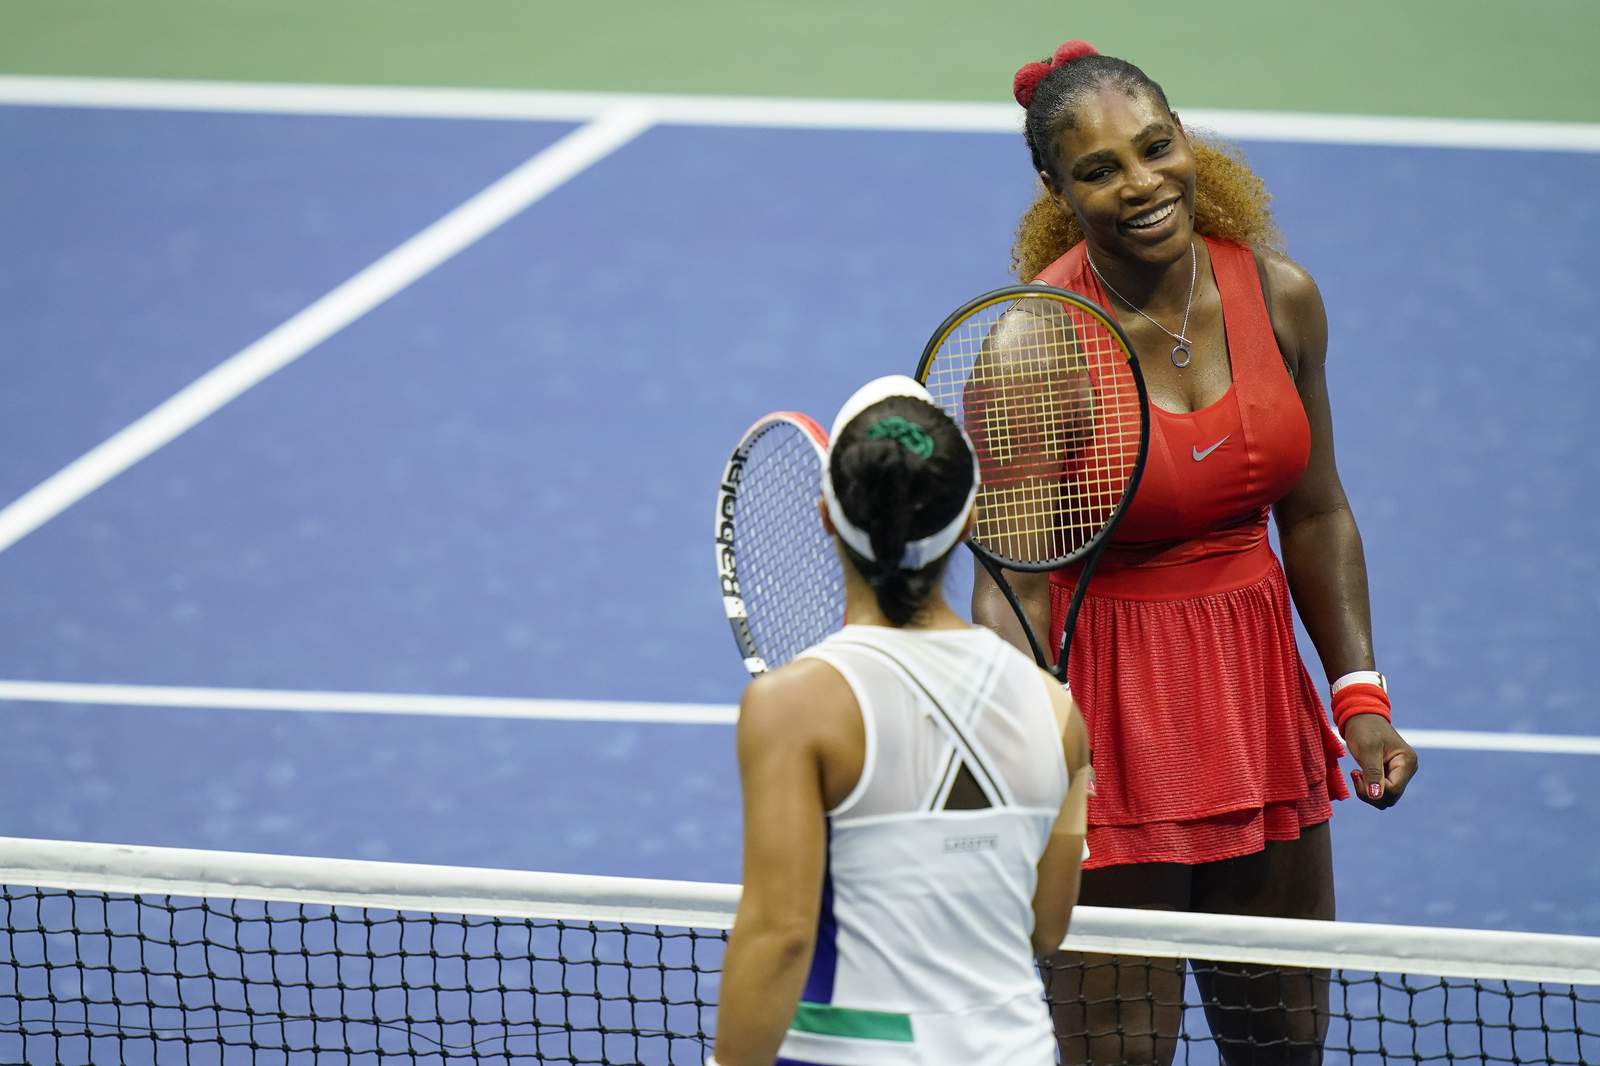 Serena Williams tops schedule with play underway at US Open